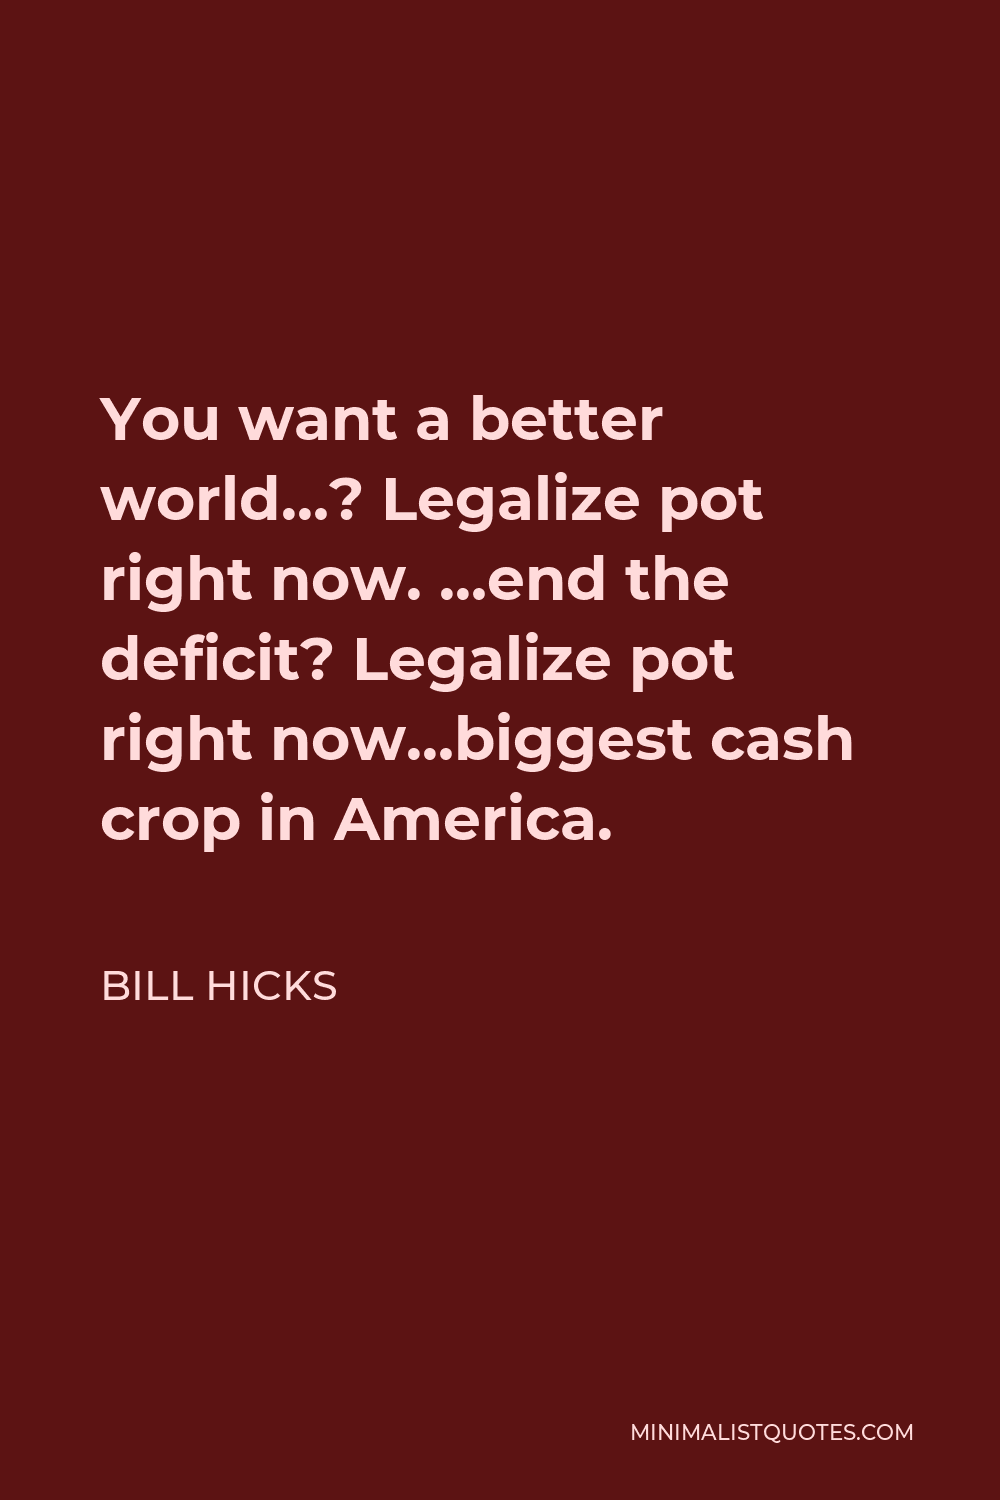 Bill Hicks Quote - You want a better world…? Legalize pot right now. …end the deficit? Legalize pot right now…biggest cash crop in America.